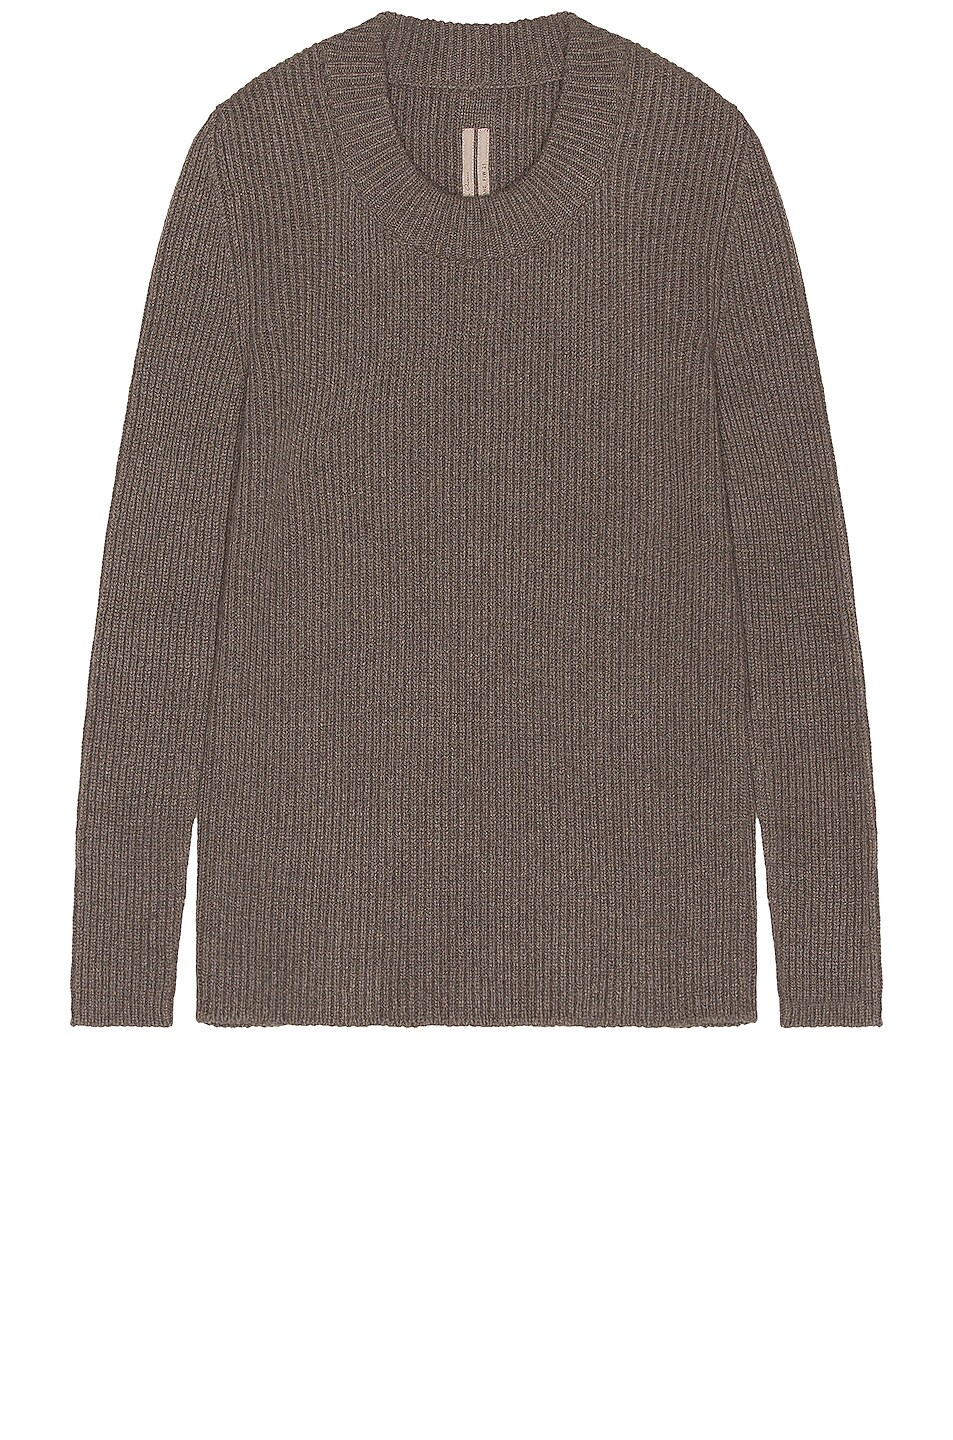 Image 1 of Rick Owens Maglia Crewneck in Dust